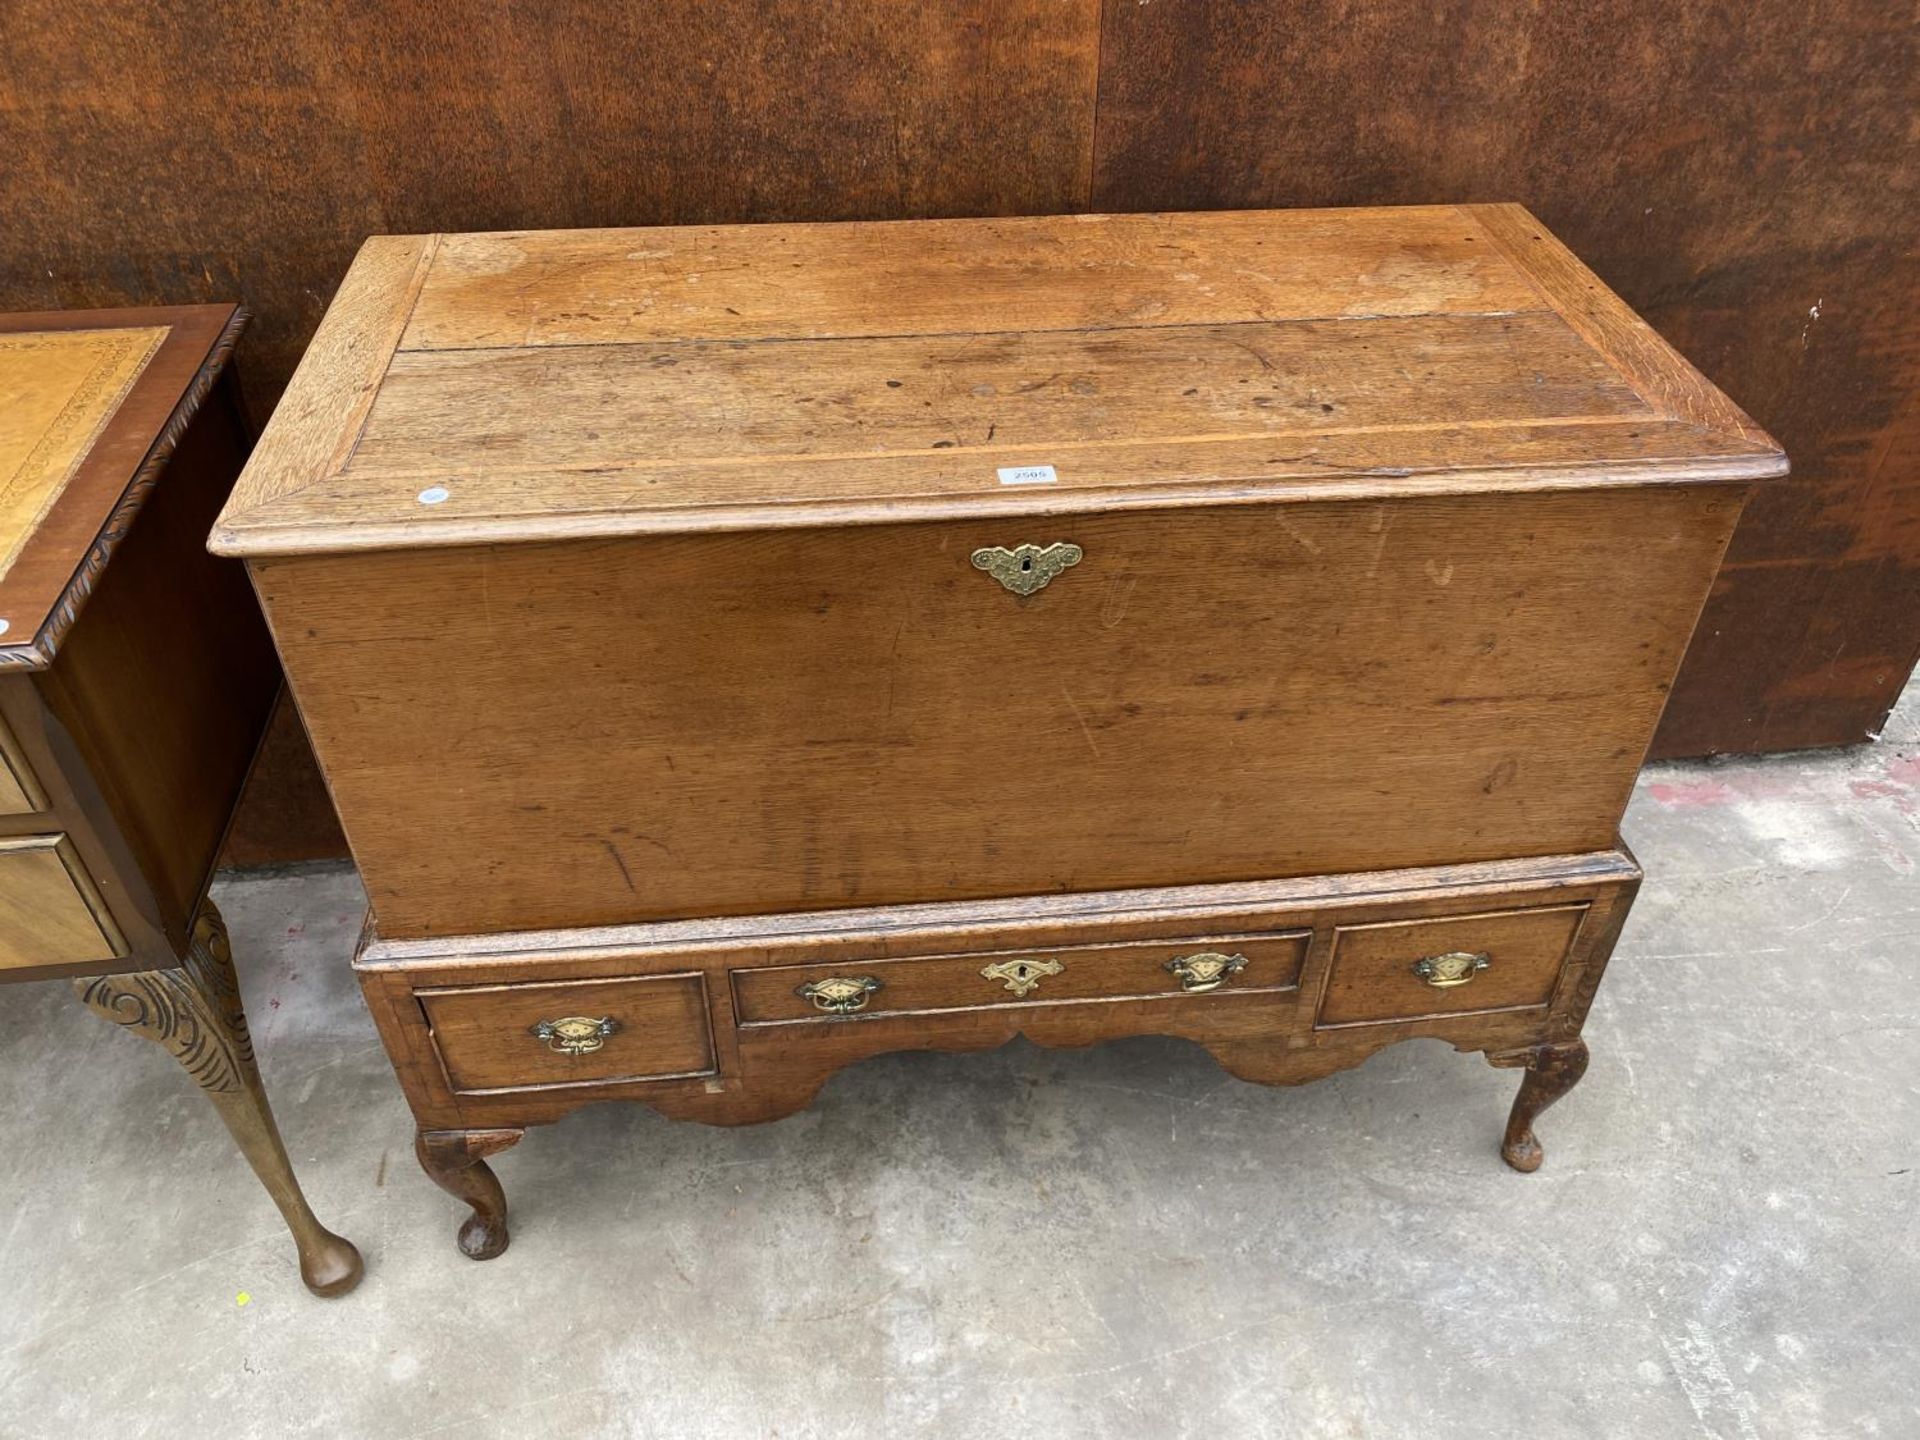 AN 18TH CENTURY OAK AND CROSSBANDED DOWRY CHEST ON STAND, ENCLOSING THREE DRAWERS ON LATER